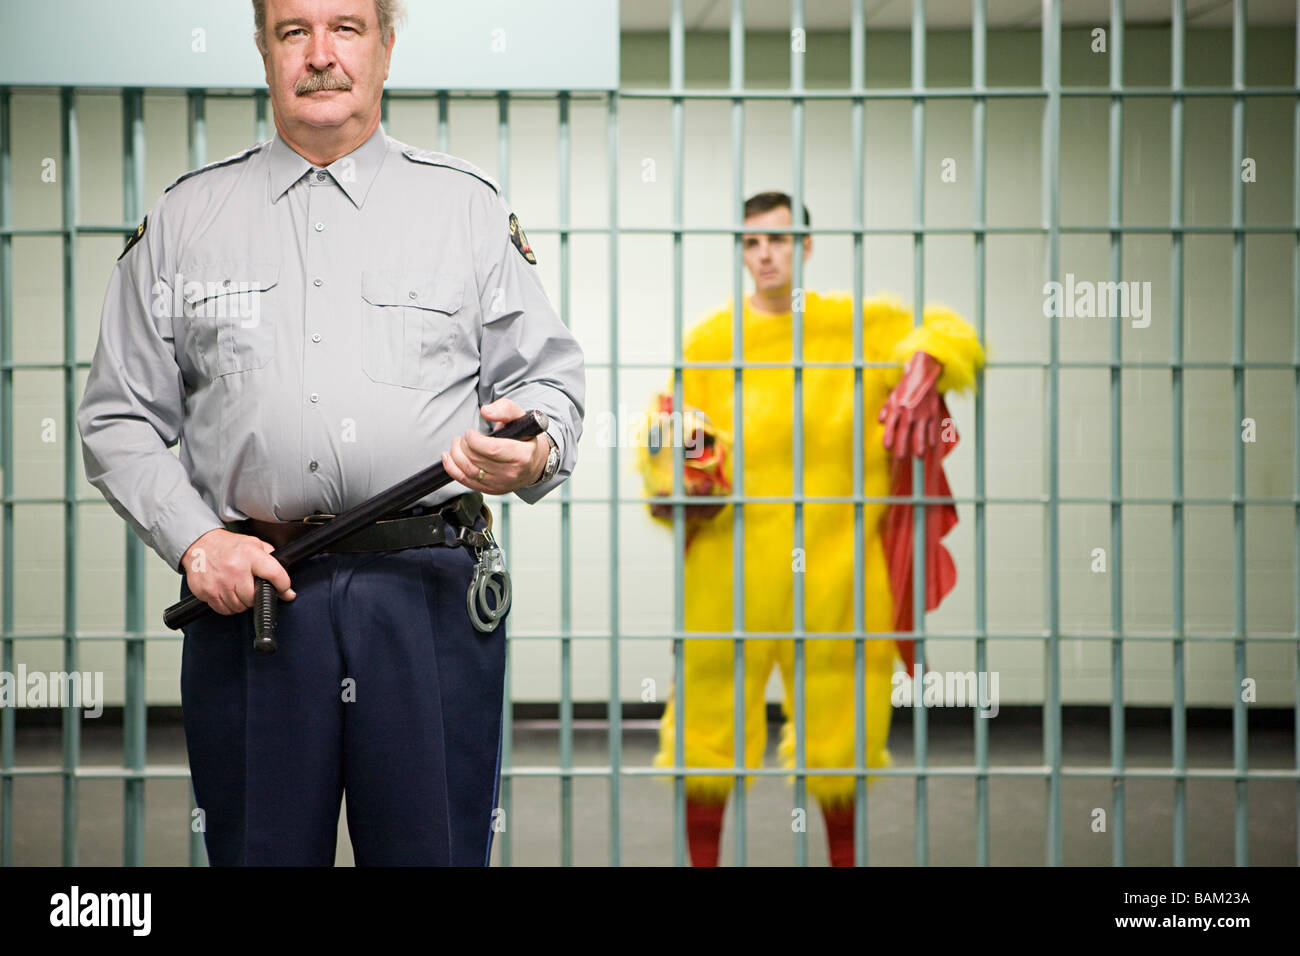 Guard and prisoner in chicken suit Stock Photo